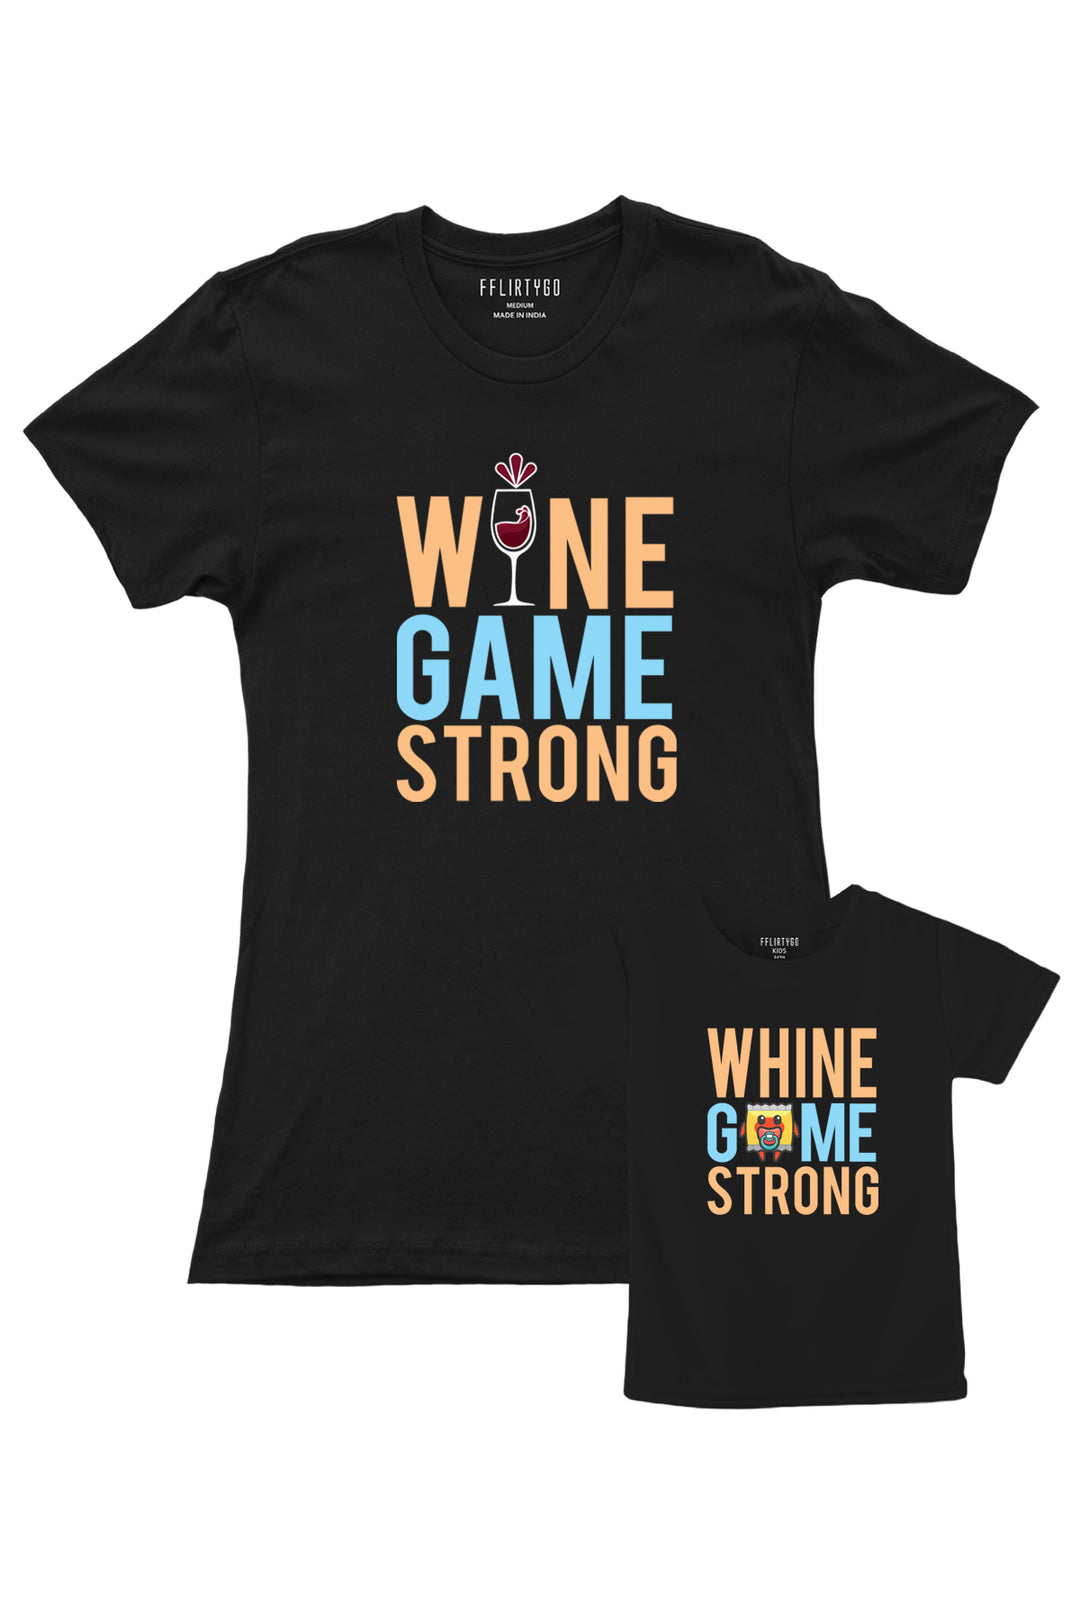 WINE GAME STRONG AND WHINE GAME STRONG